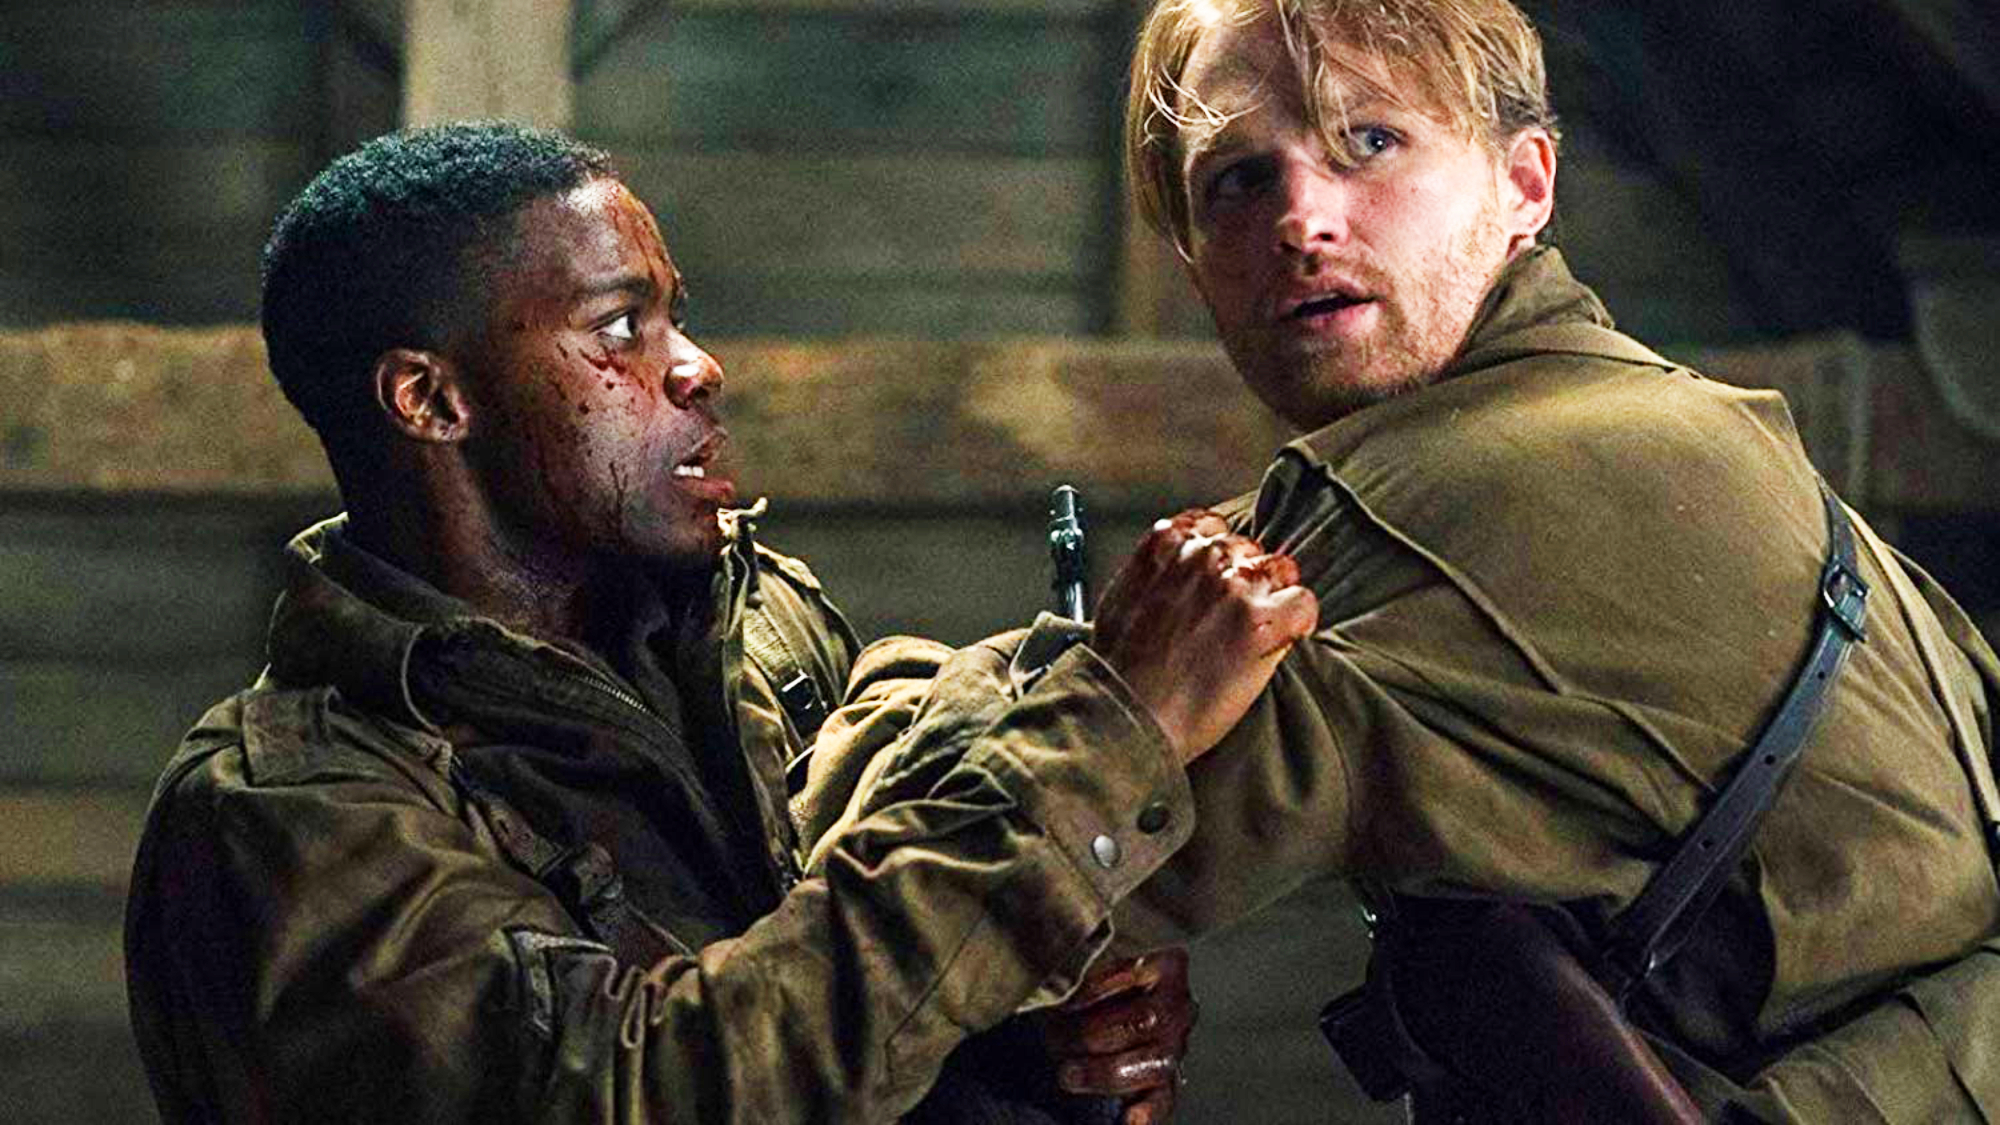 Jovan Adepo and Wyatt Russell in Overlord movie (2018)